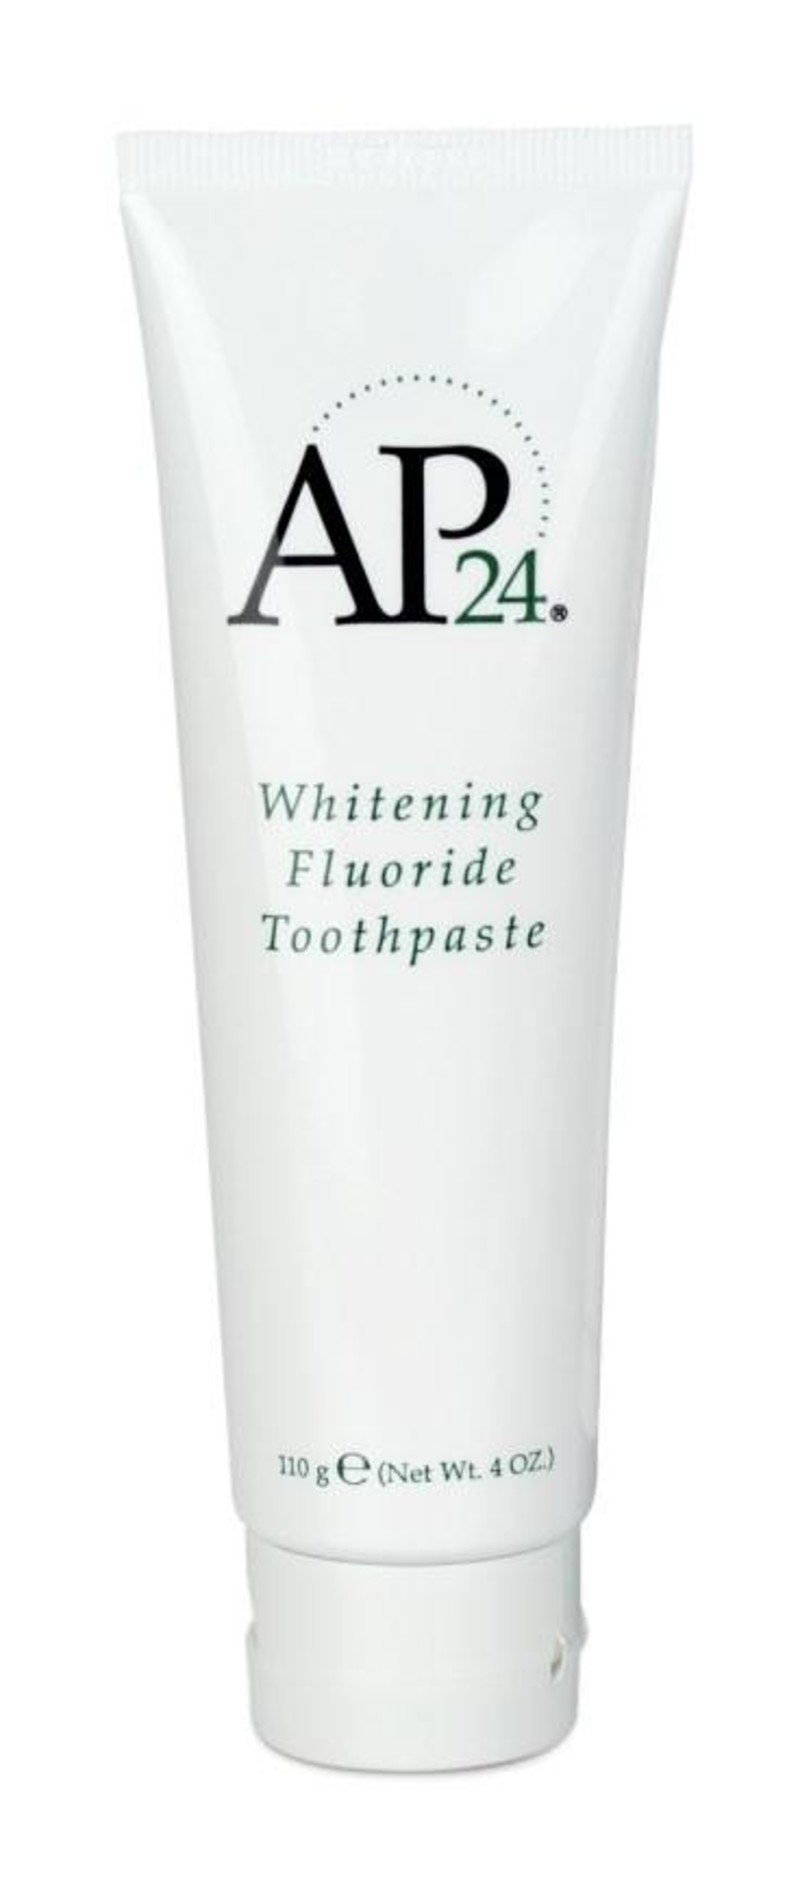 AP-24 Whitening Fluoride | Nu skin | dent - We Are Eves: honest cosmetic reviews.